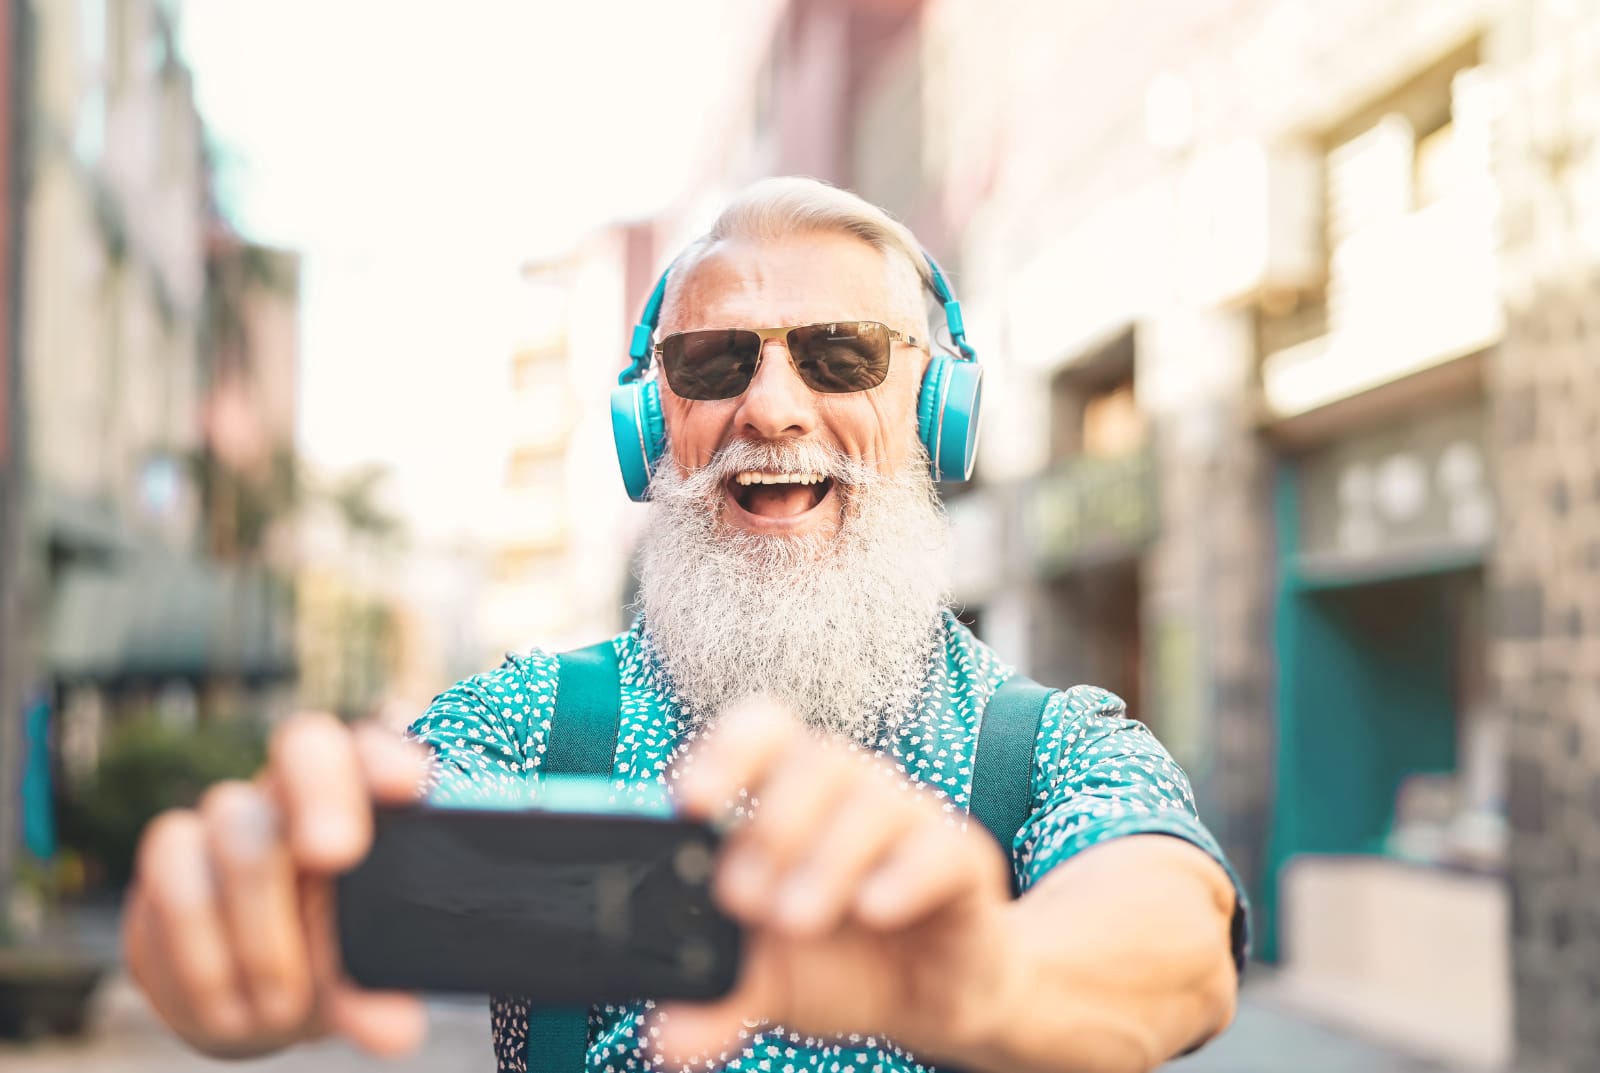 Older fashionable man laughing while recording himself with his phone